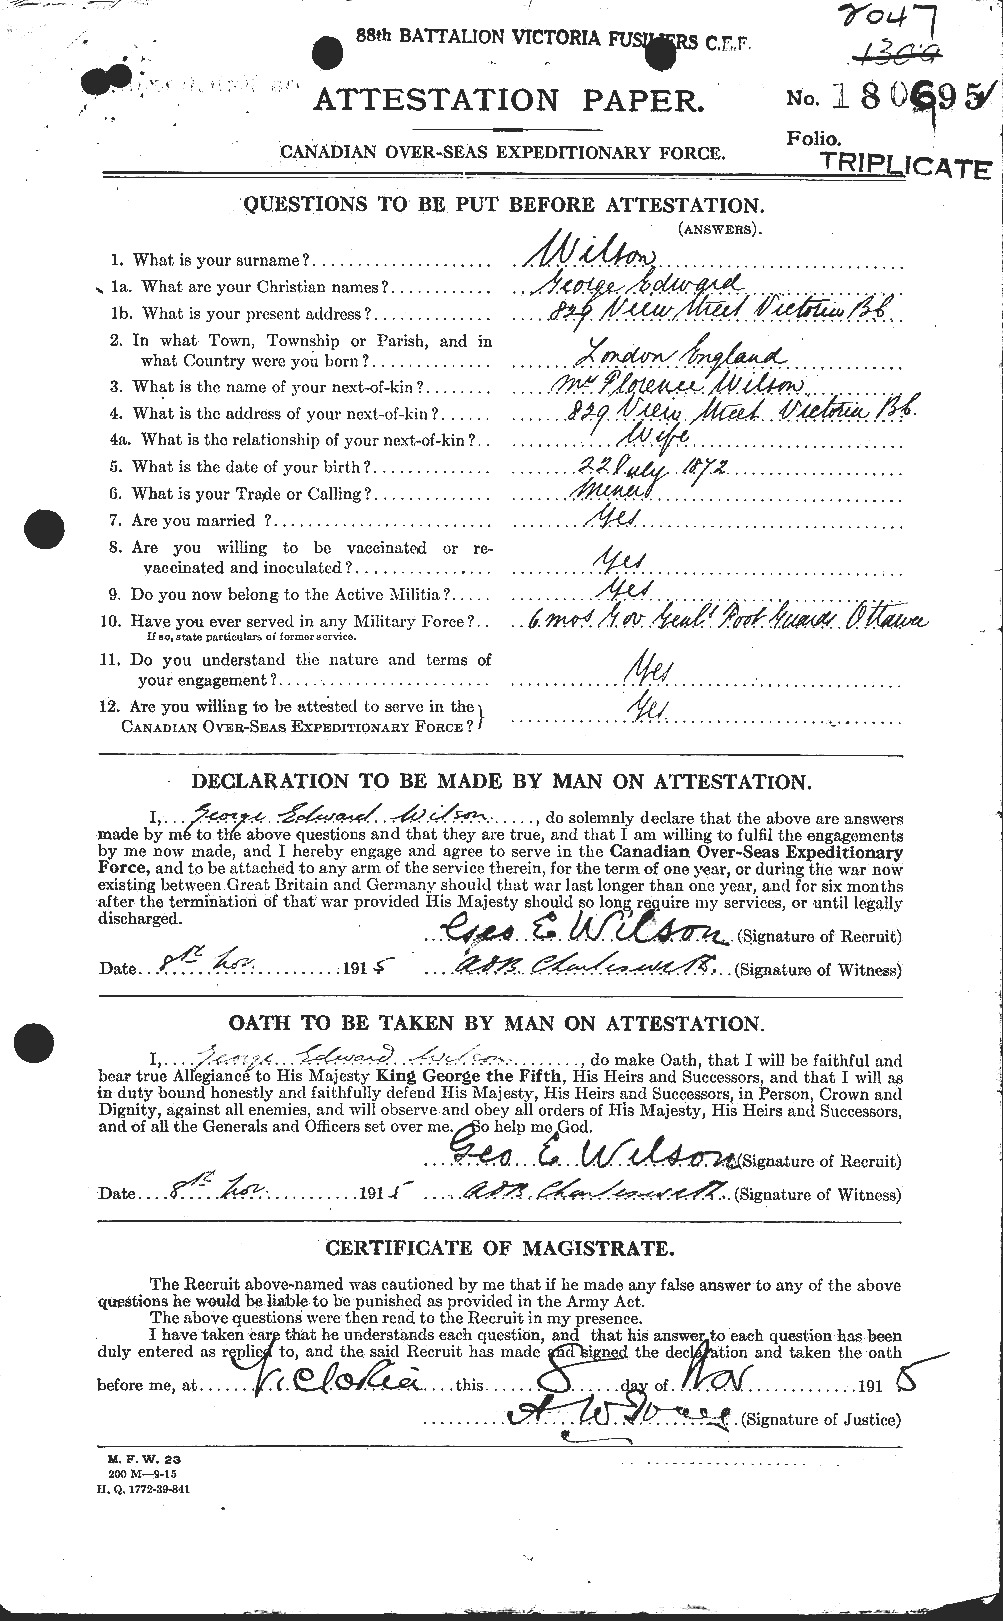 Personnel Records of the First World War - CEF 679272a